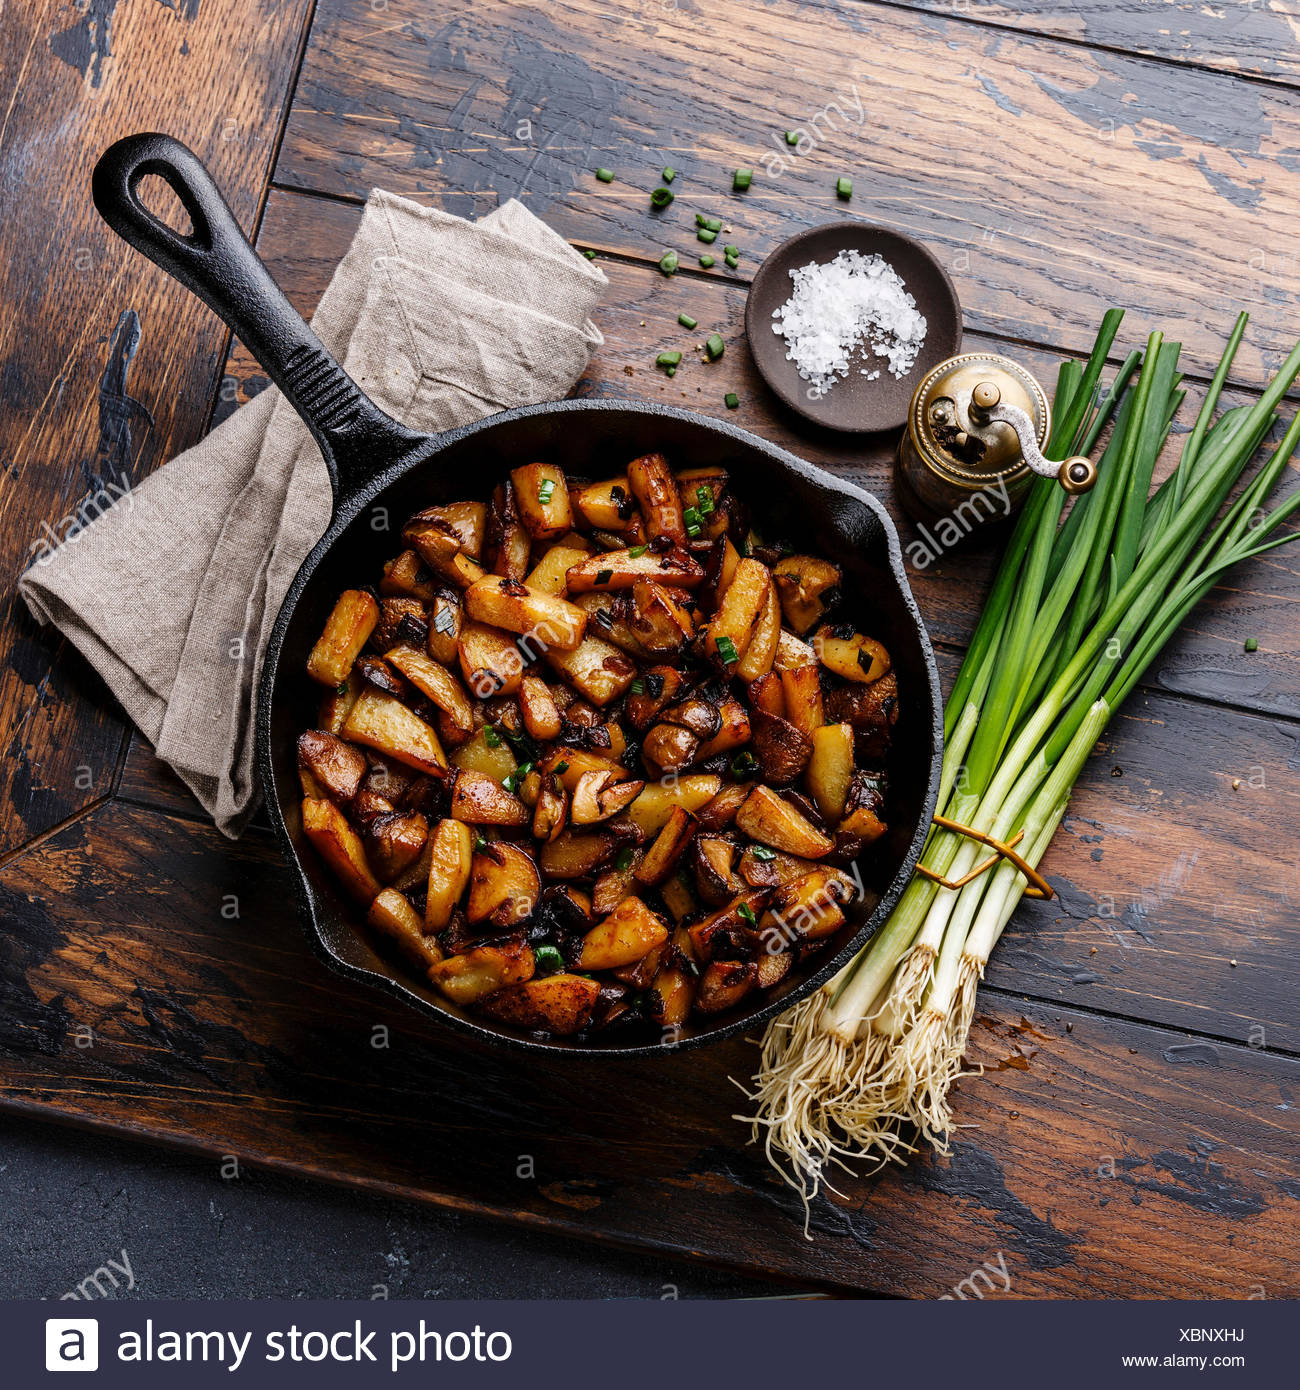 Fried Potatoes Roasted With Porcini Mushrooms In Cooking Pan On Wooden Background Stock Photo Alamy,Italian Parsley Vs Parsley